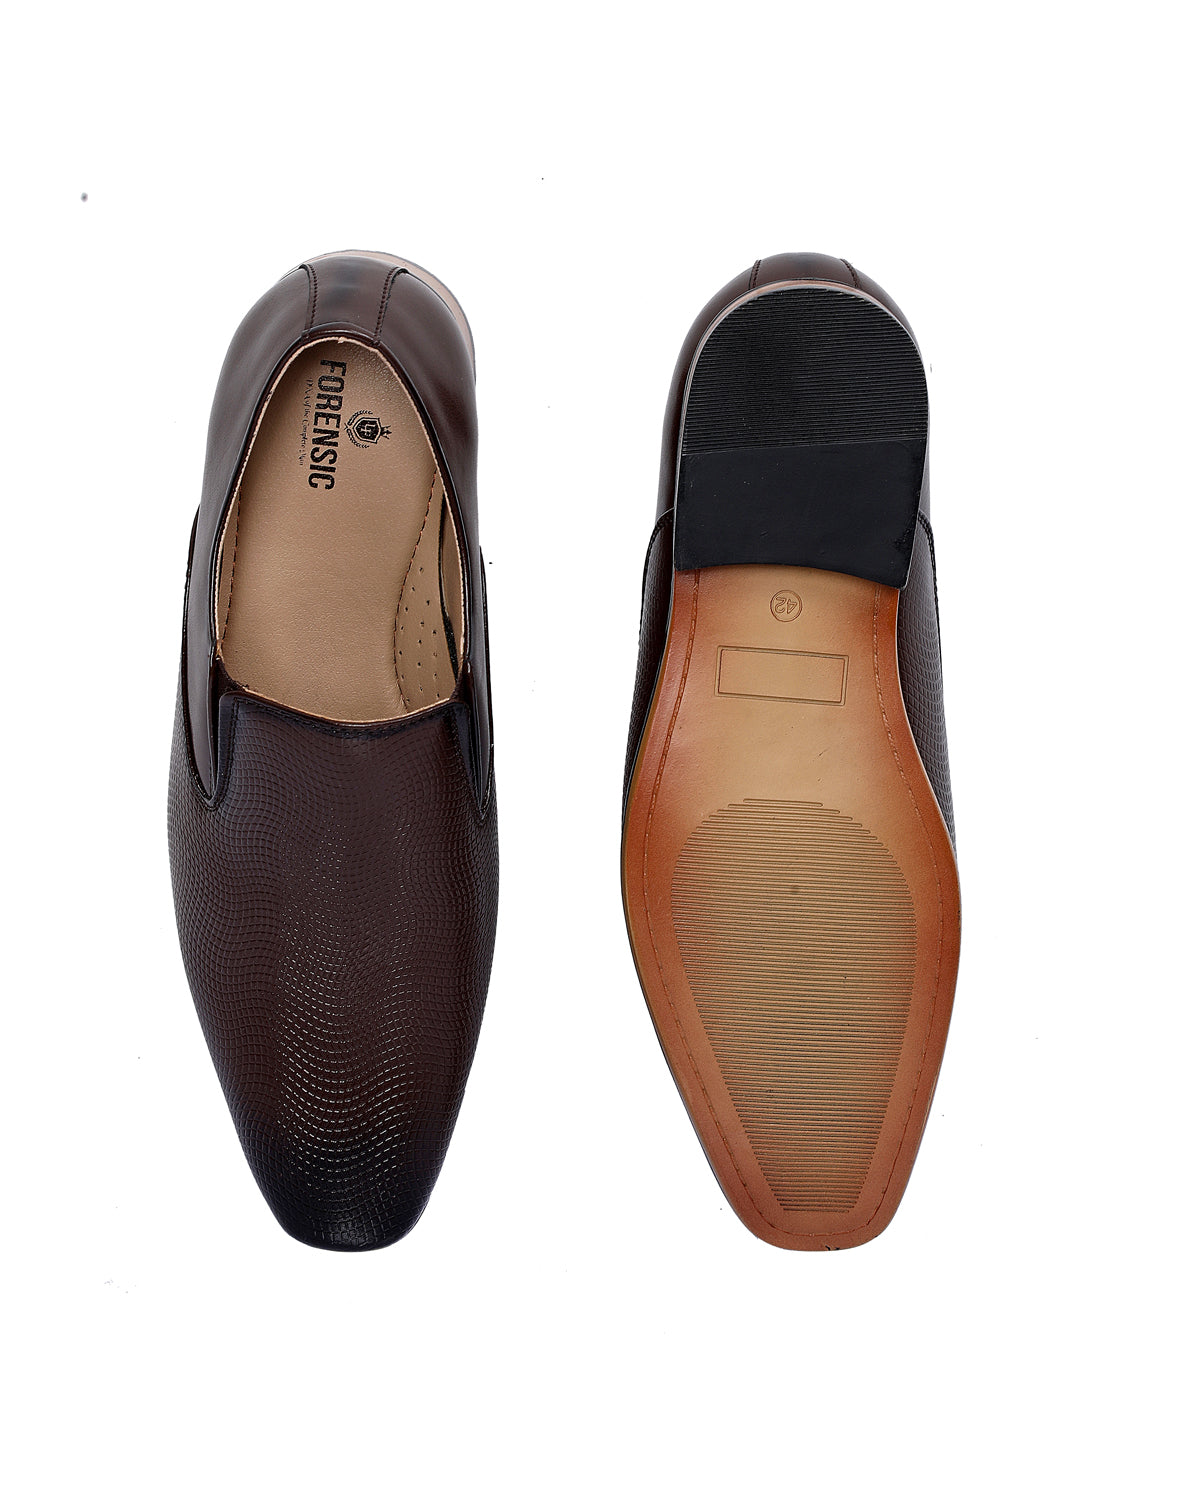 Perforated Slip-On Leather Shoes